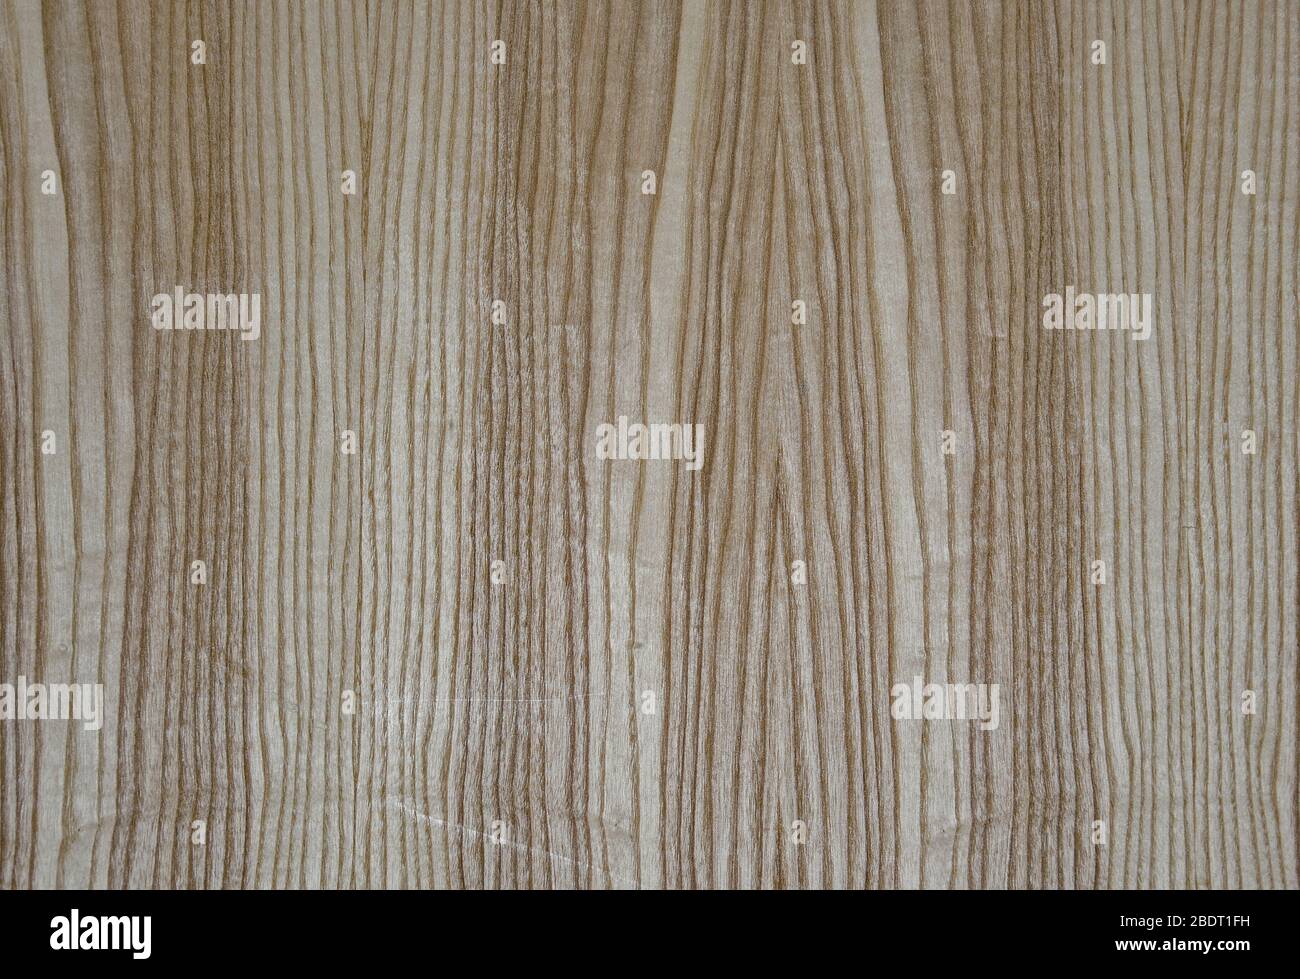 Wood textures. The background is brown with pinkish stripes. Stock Photo